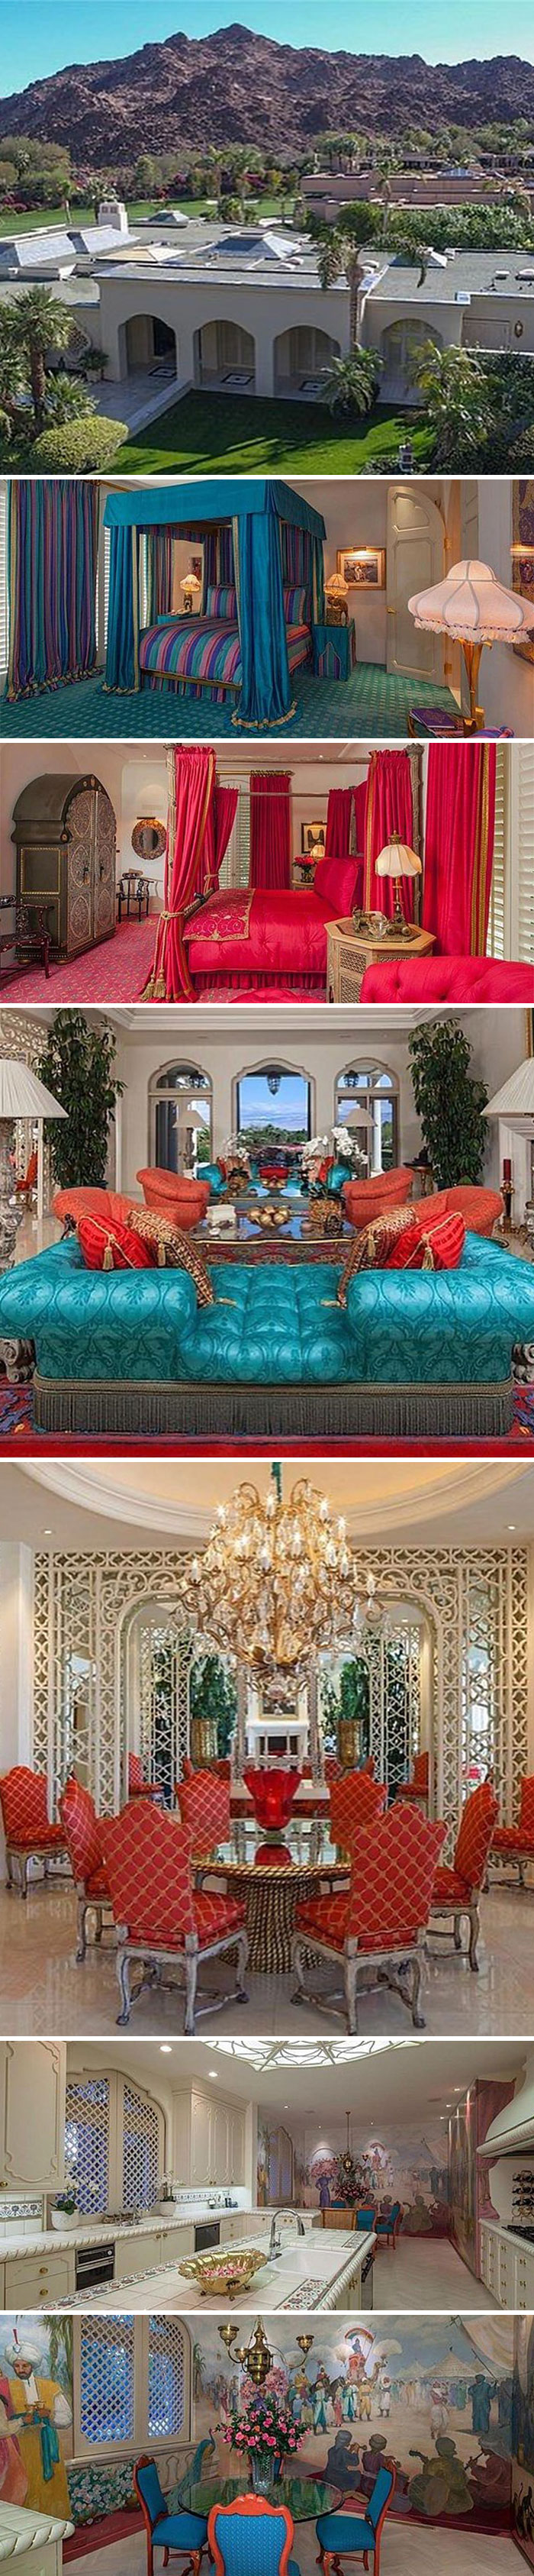 This Furniture Is Wow $7,995,000